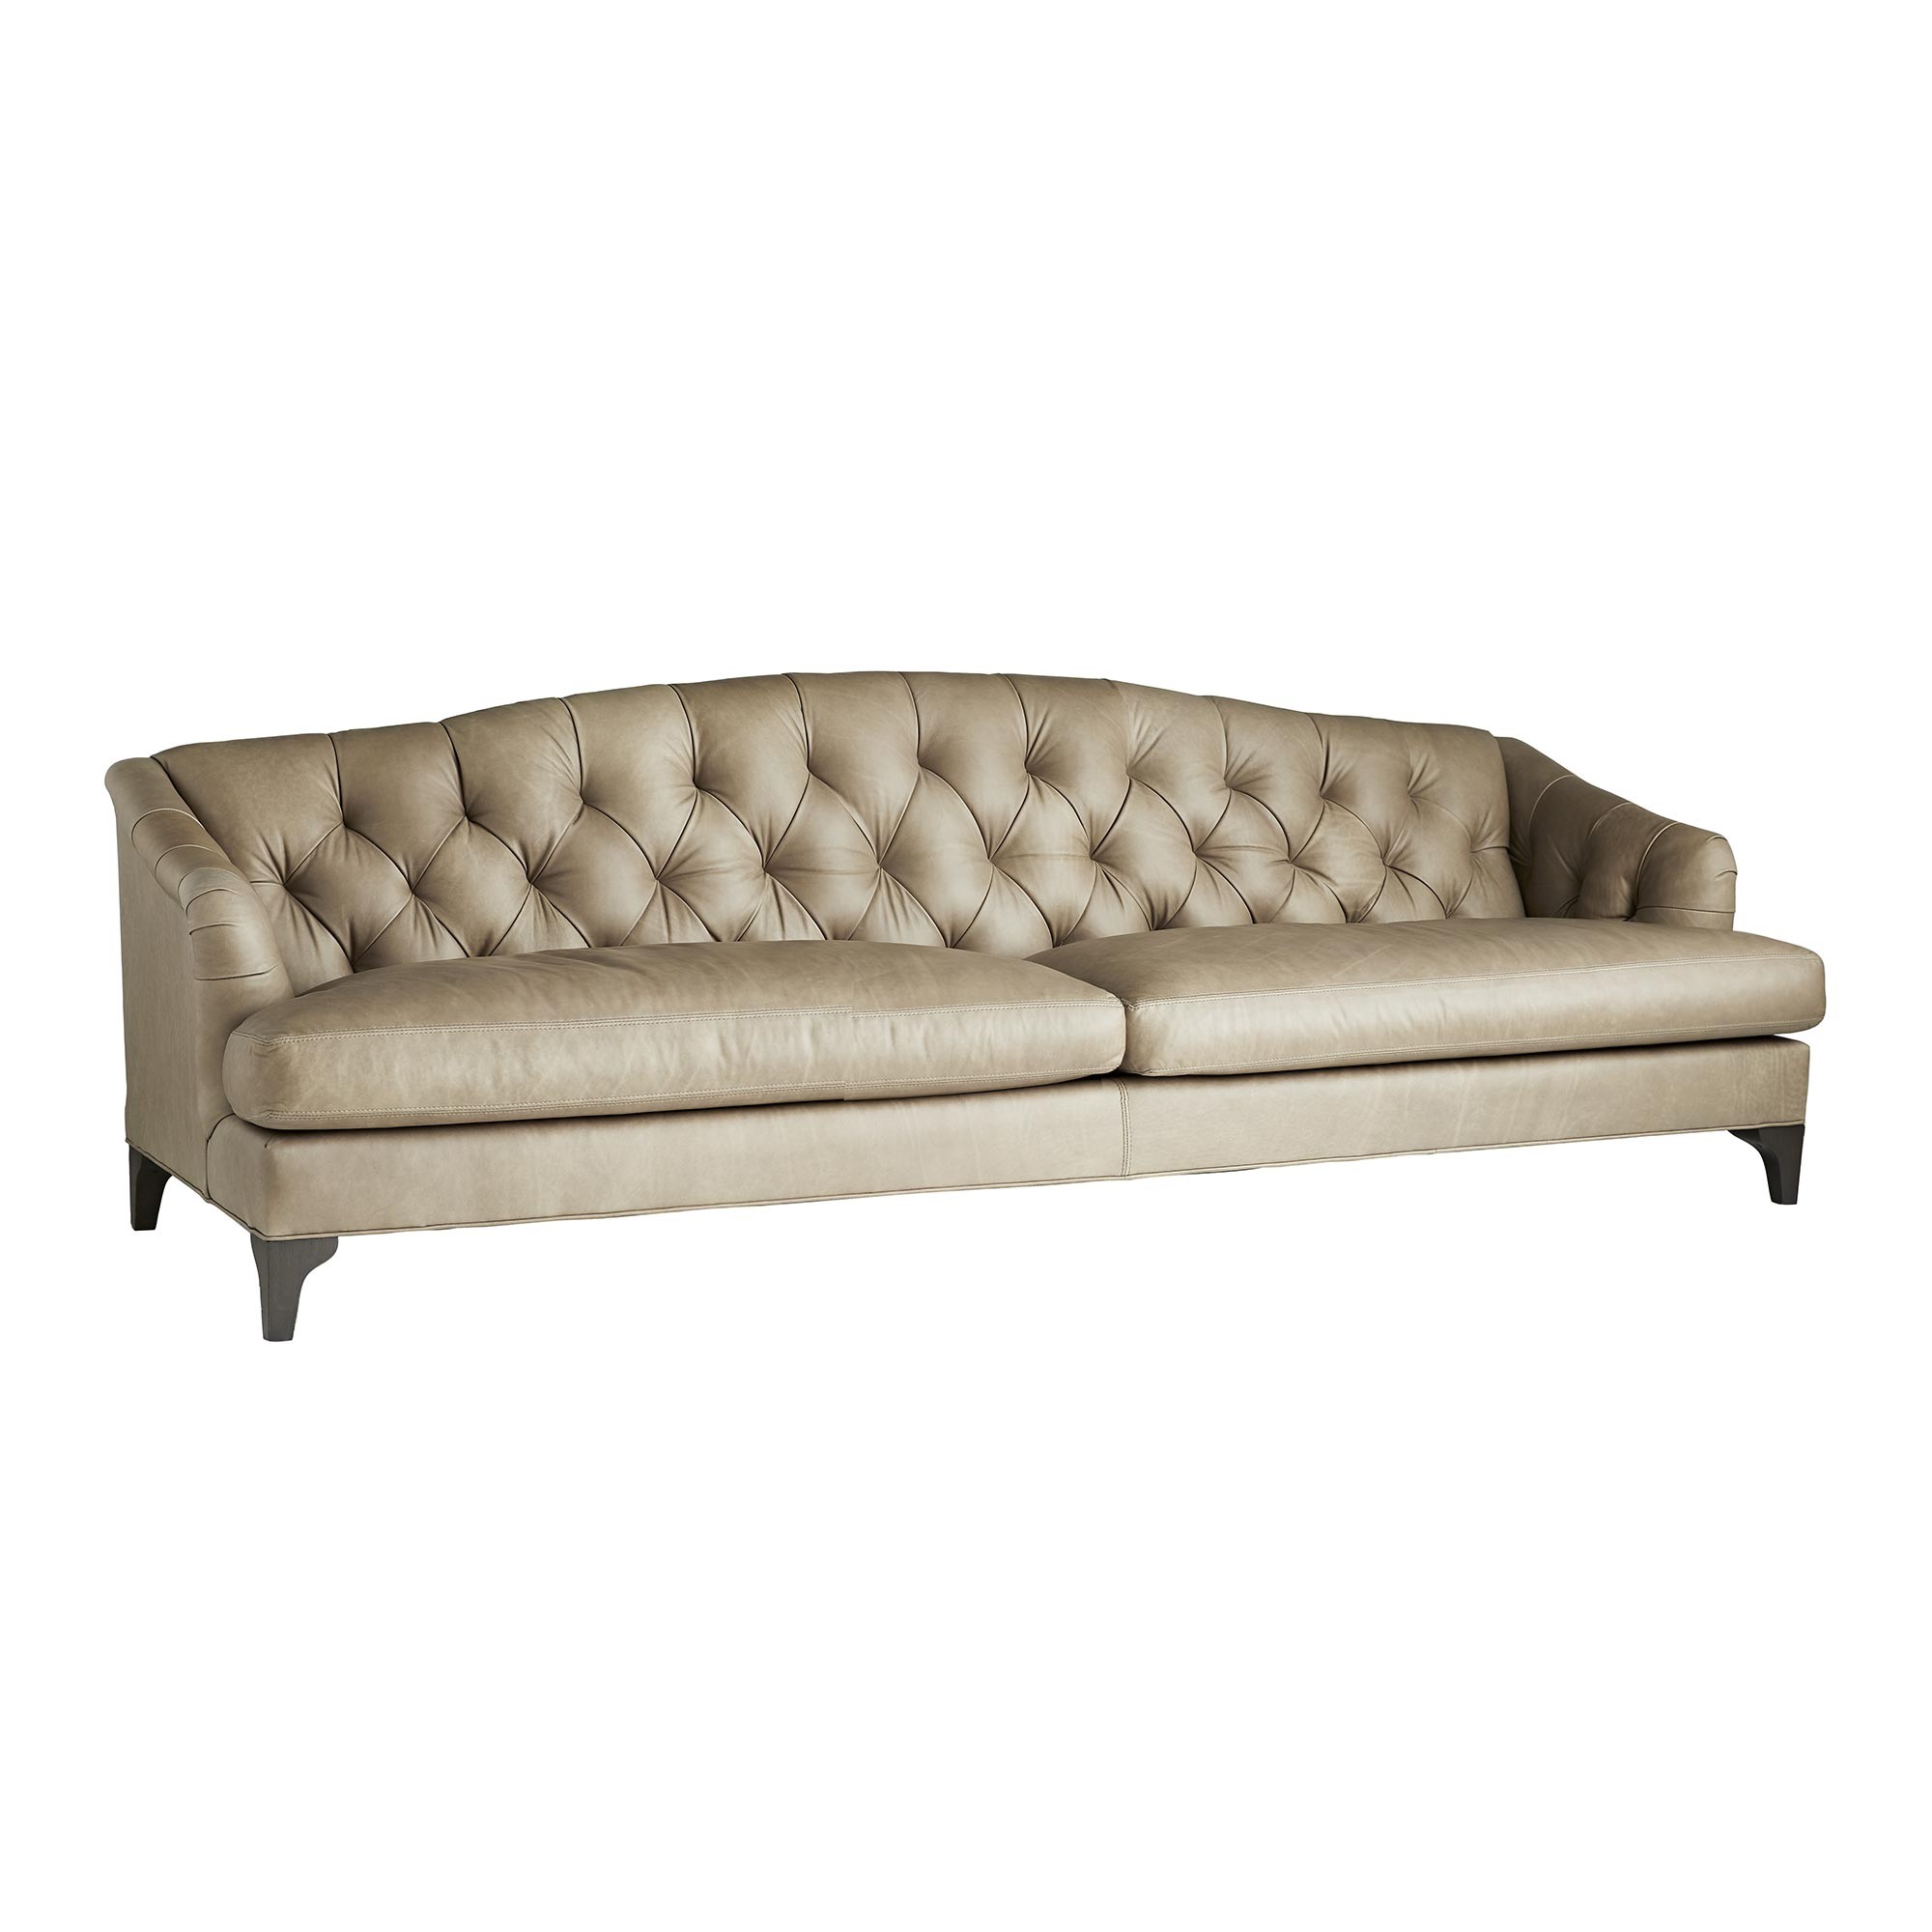 Tufted Leather Sofa Modern Gray, Tufted Leather Couches